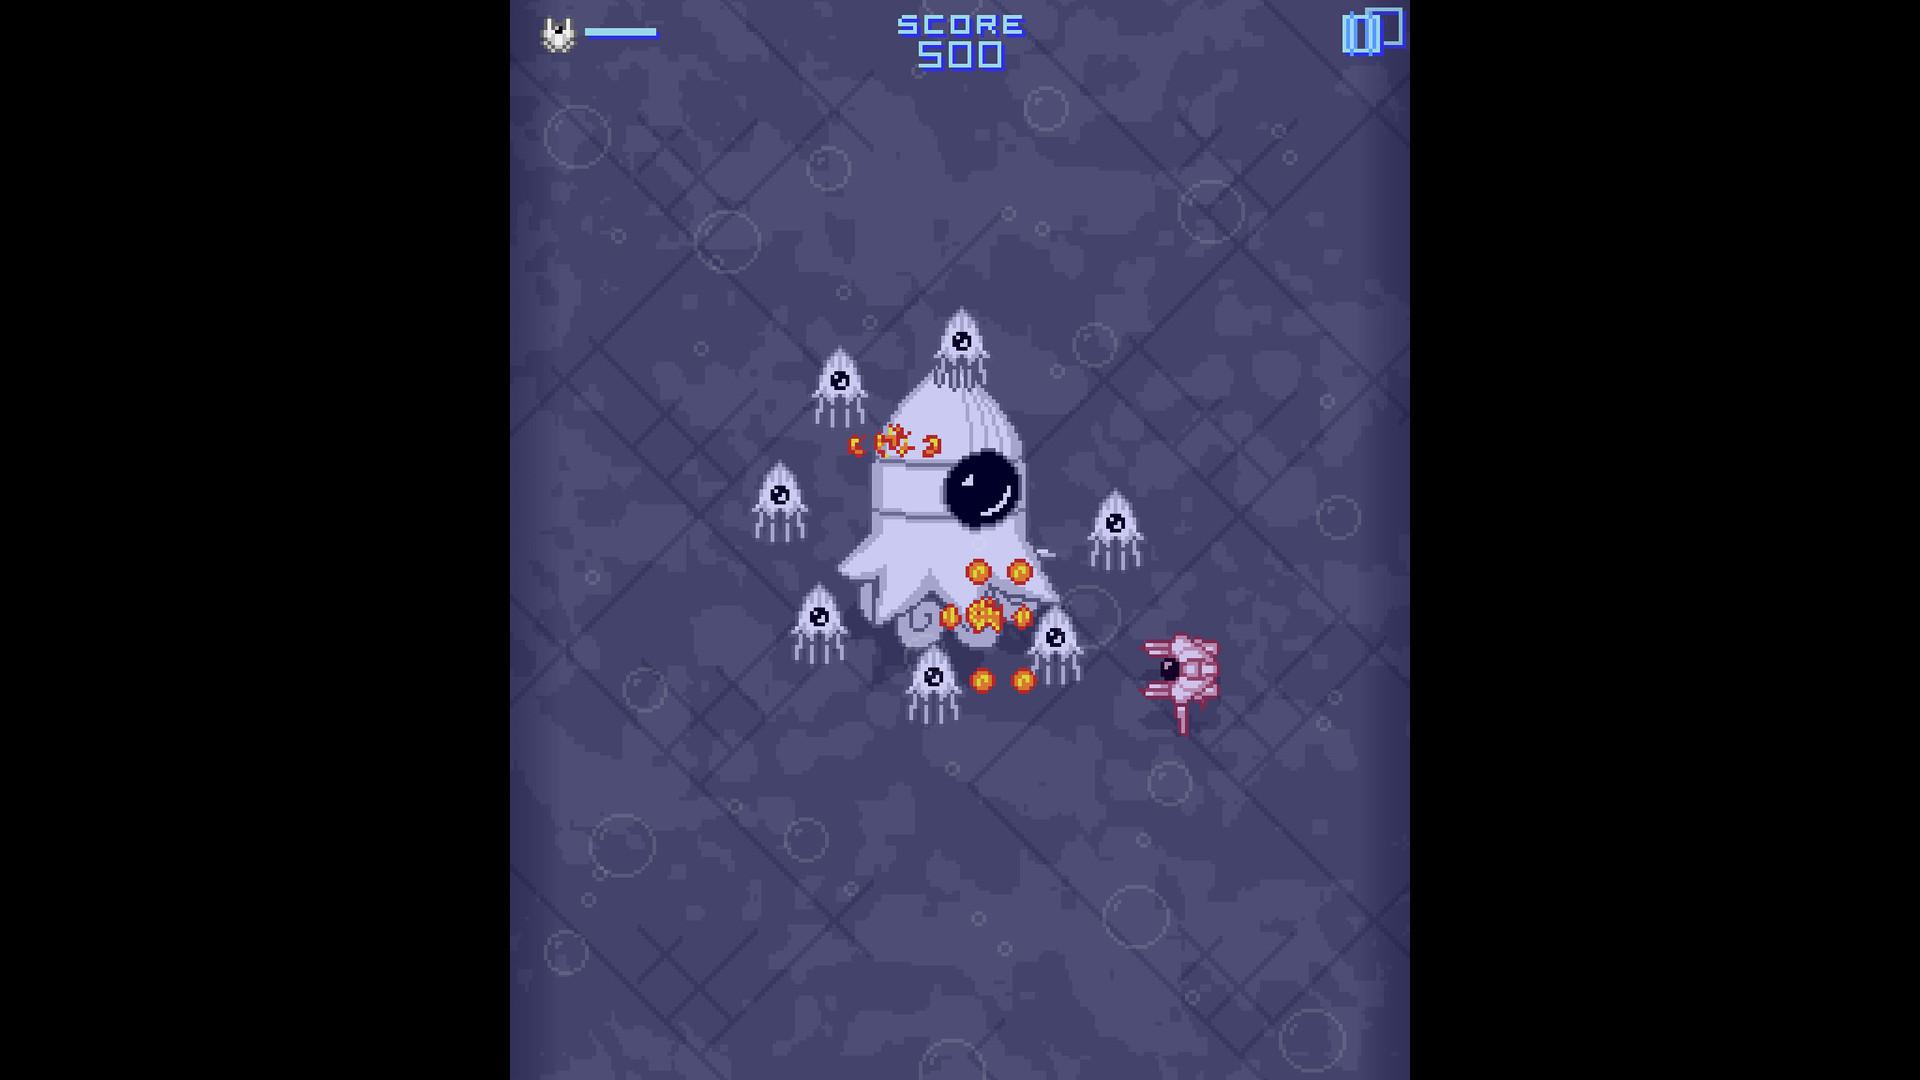 Screenshot №7 from game Mobile Astro